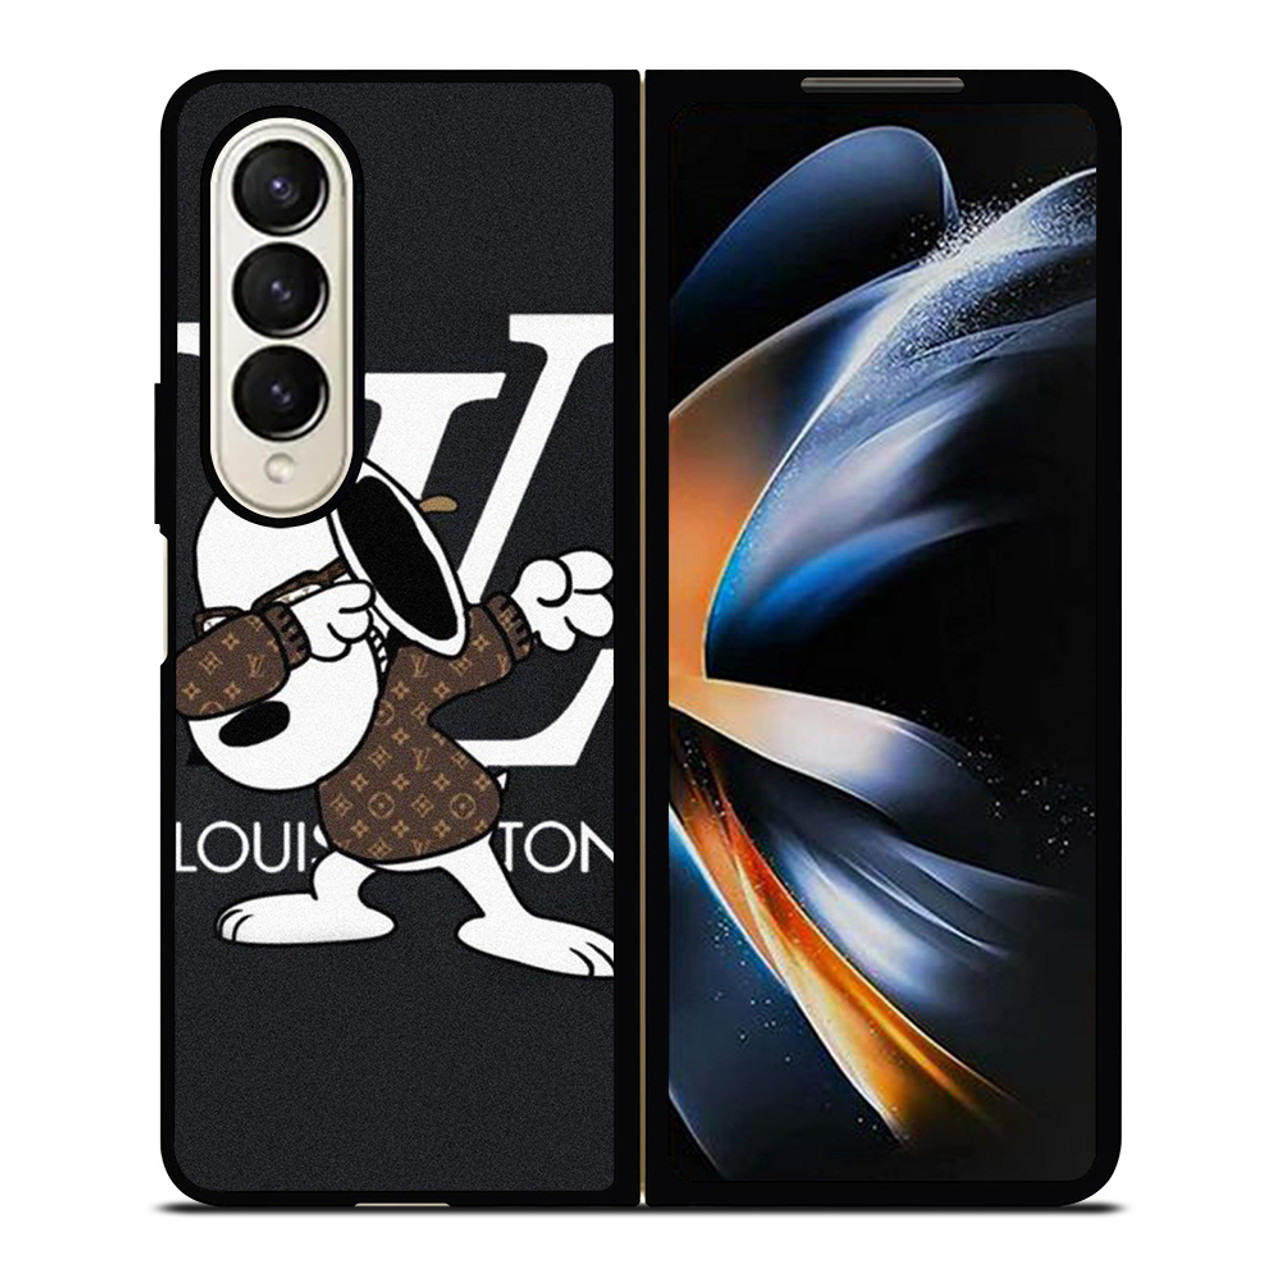 SNOOPY LOUIS VUITTON DAB STYLE Samsung Galaxy S22 Ultra Case Cover